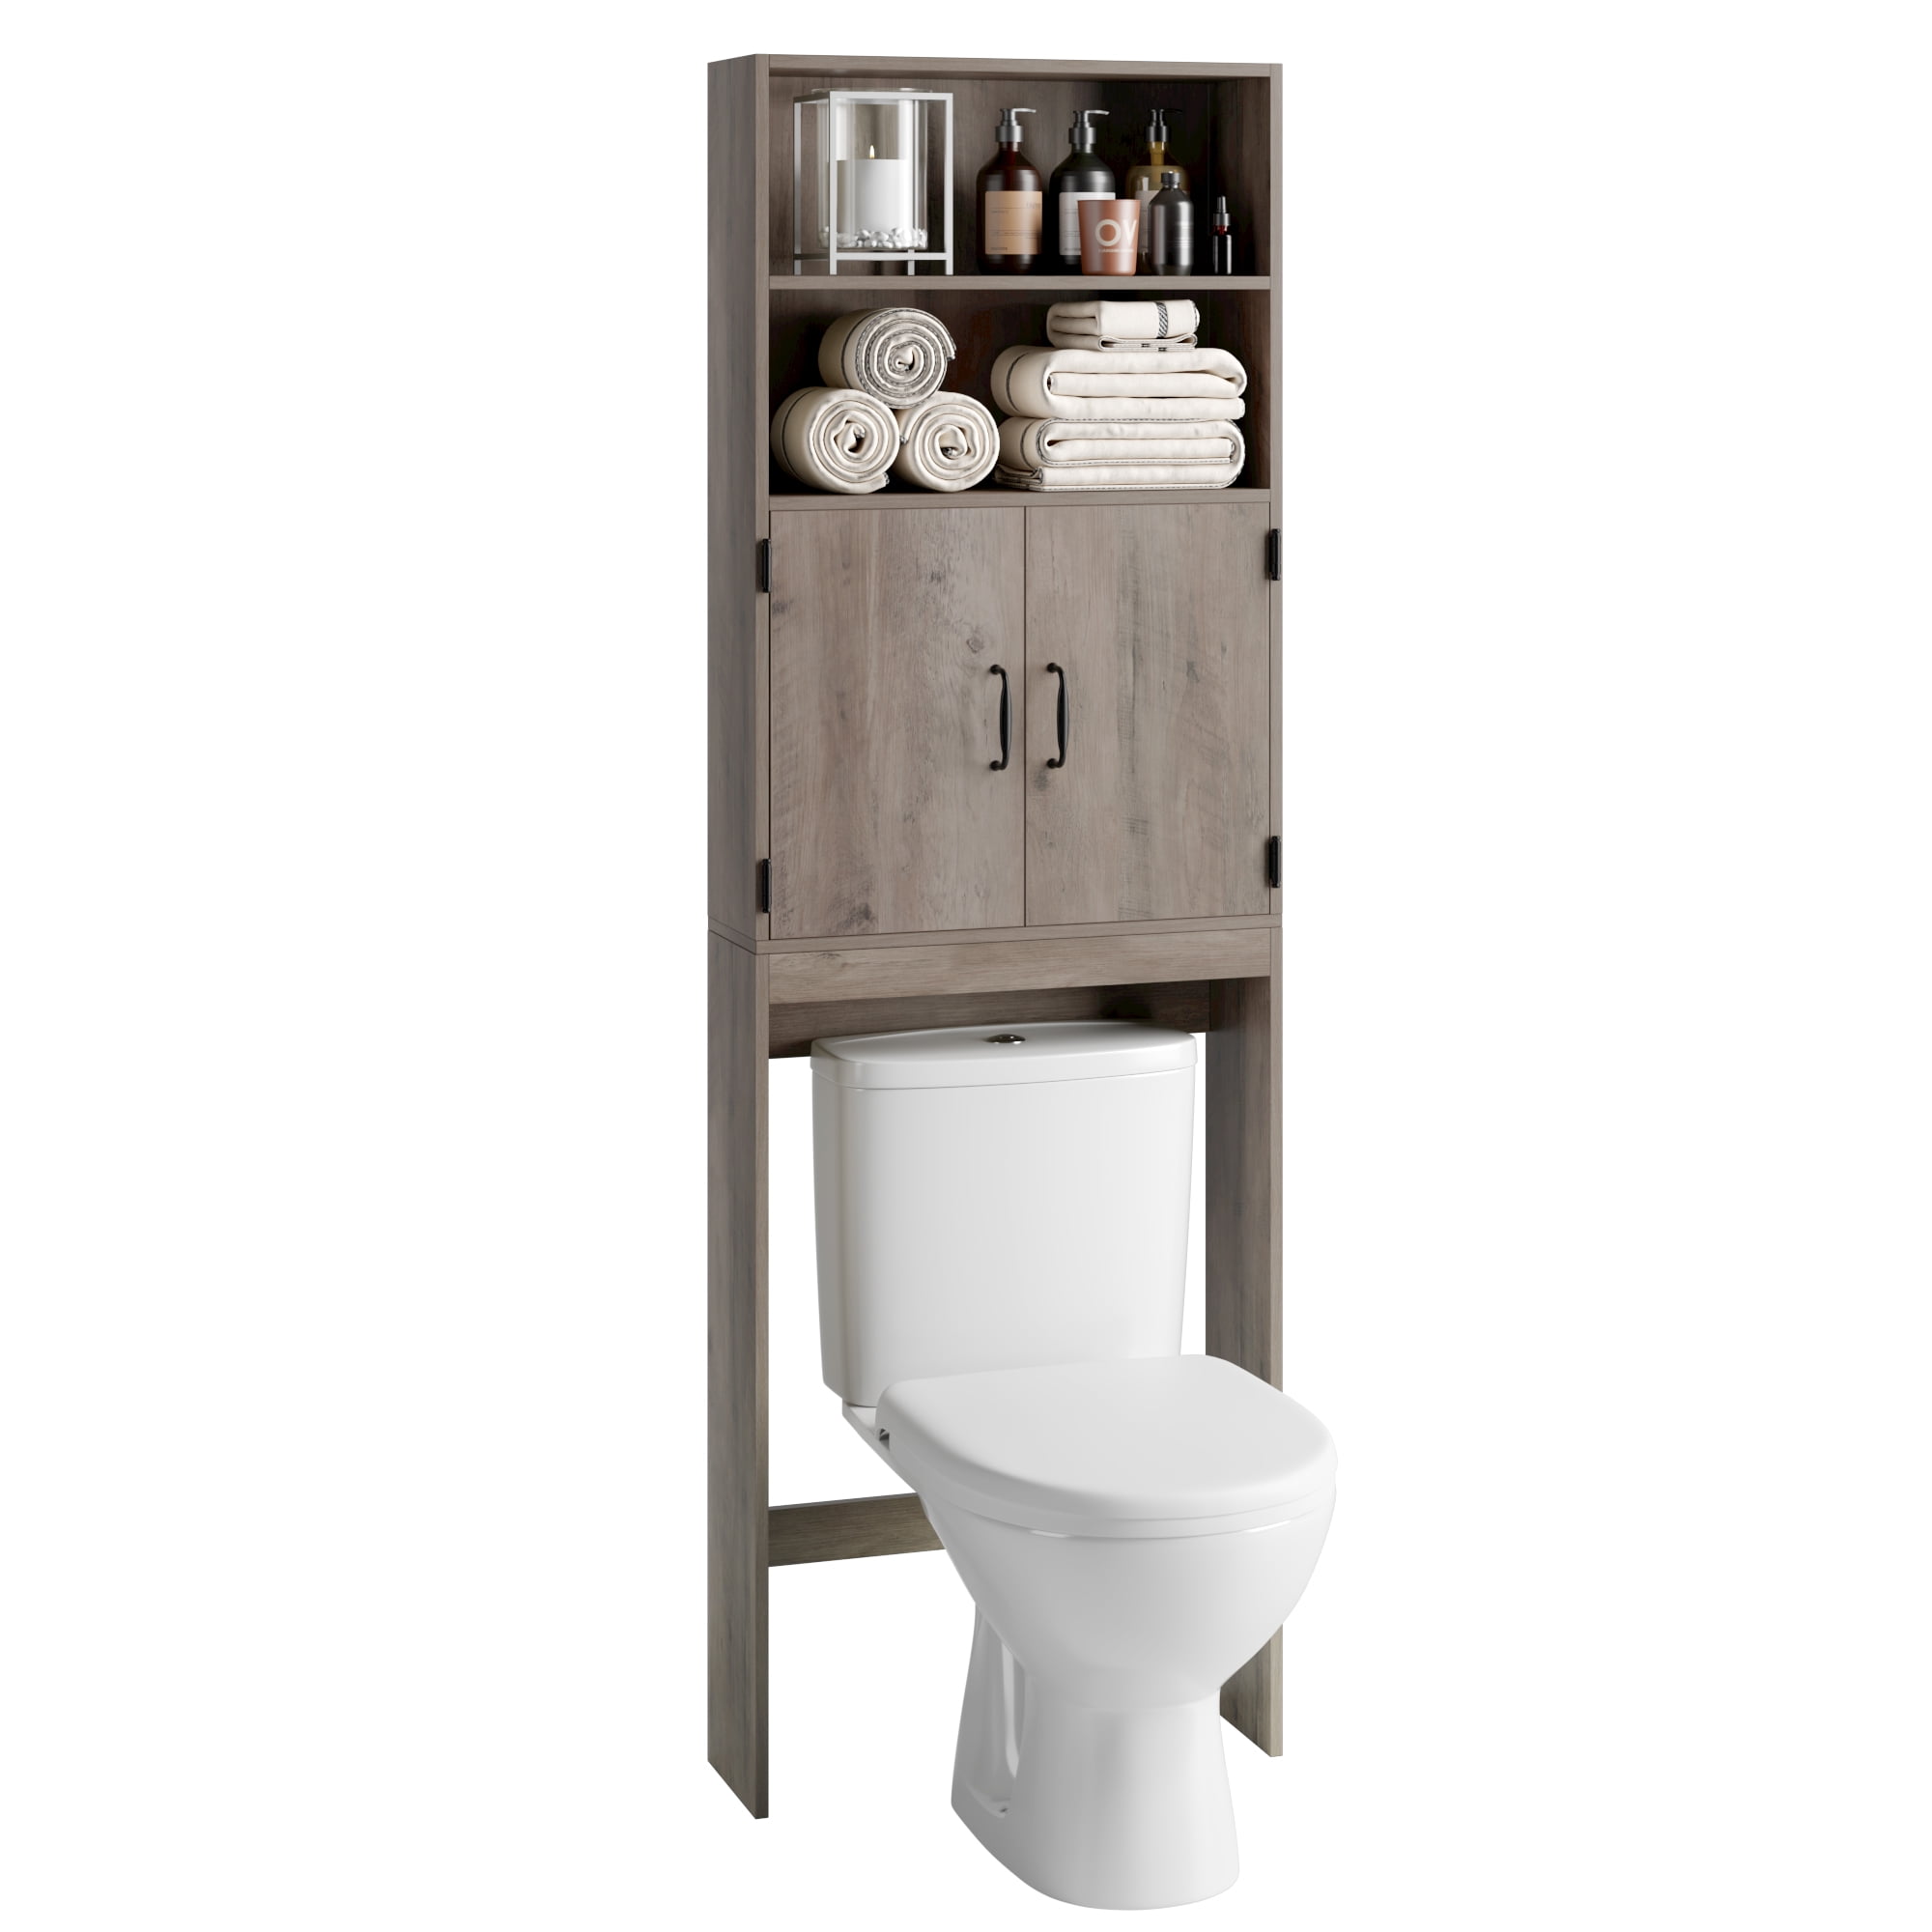 Homeika Bathroom Storage Cabinet with 2 Doors and 2 Shelves, 4 Tier Design Toilet Paper Storage Stand for Small Space and Corner, L6.7 x W6 x H31 inch